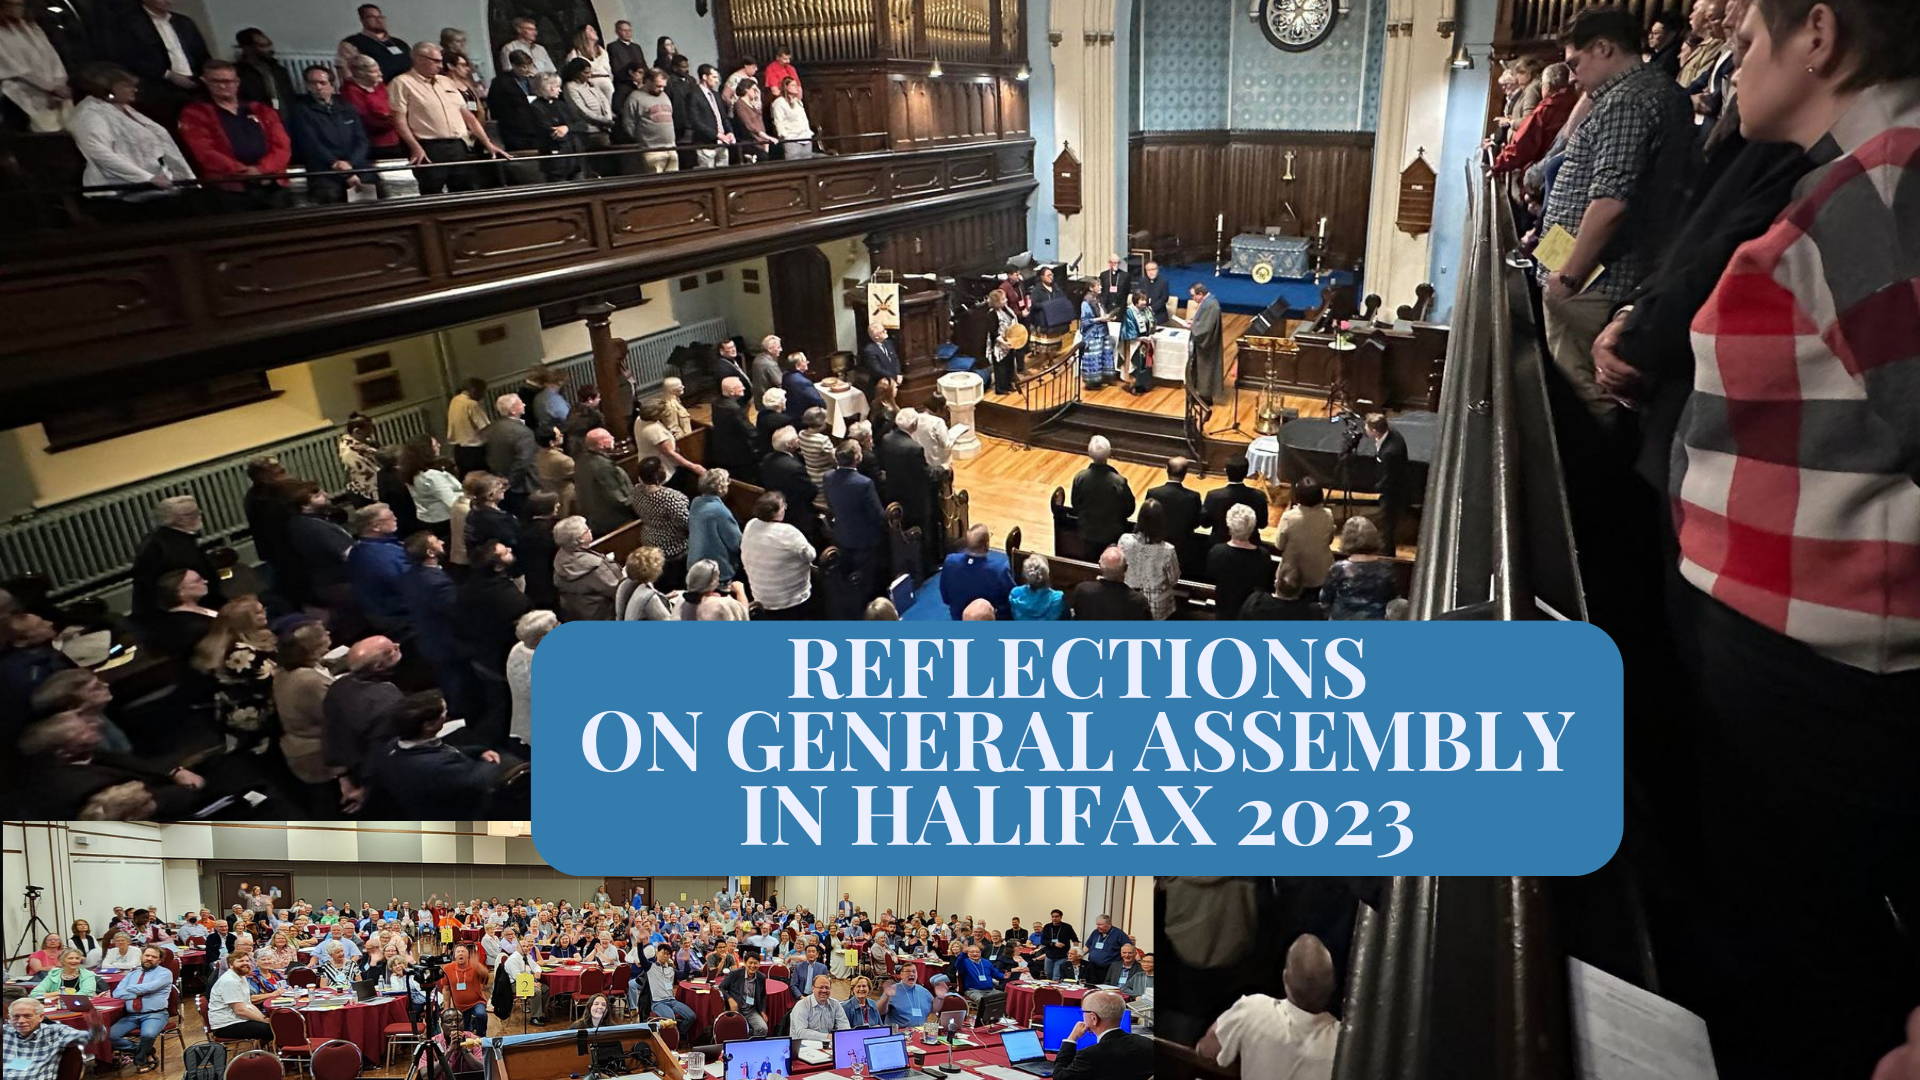 Reflections on General Assembly in Halifax 2023